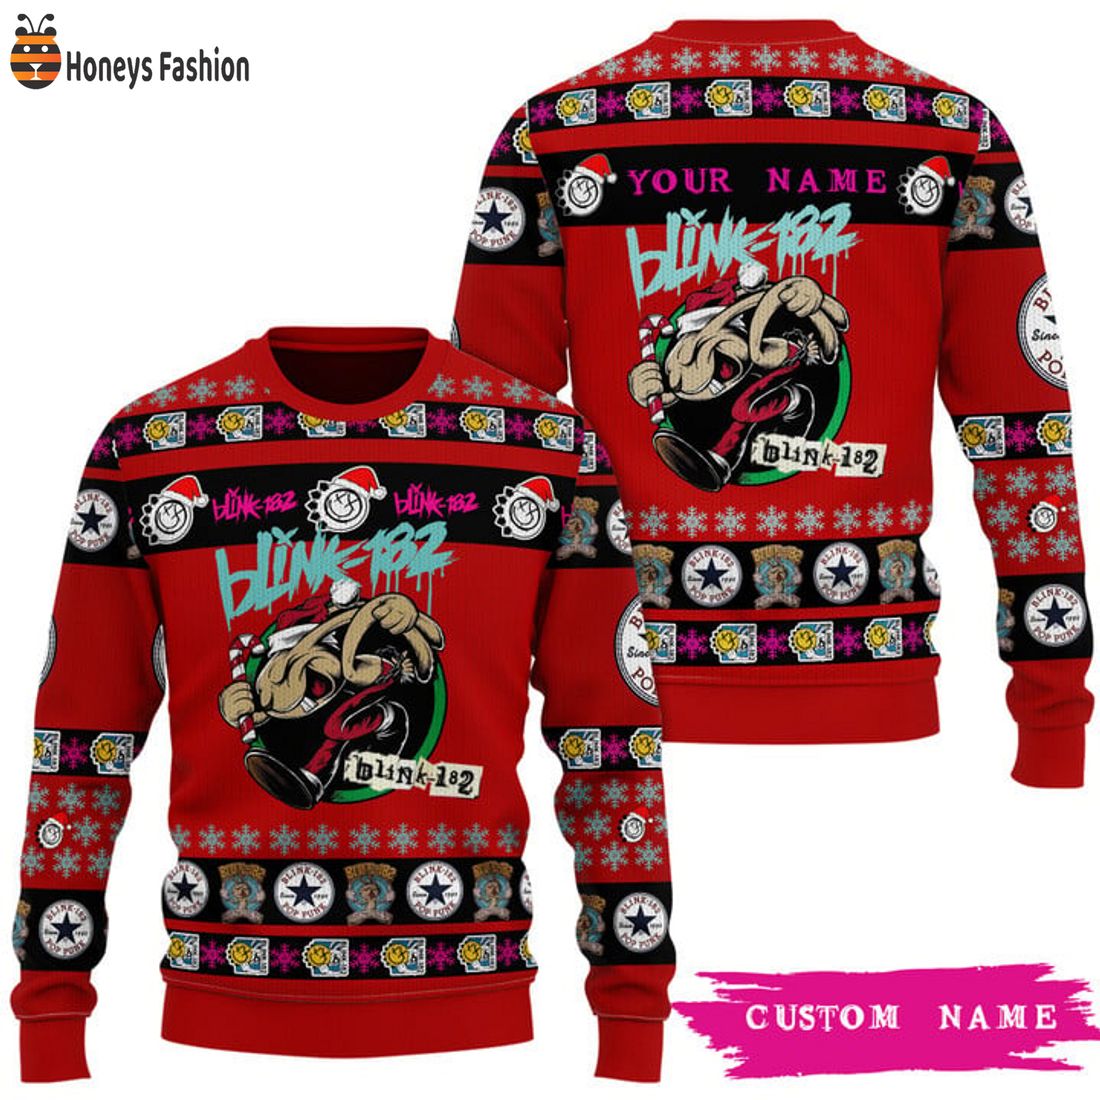 BEST Blink 182 Bunny Custome Personalized Ugly Christmas Sweater